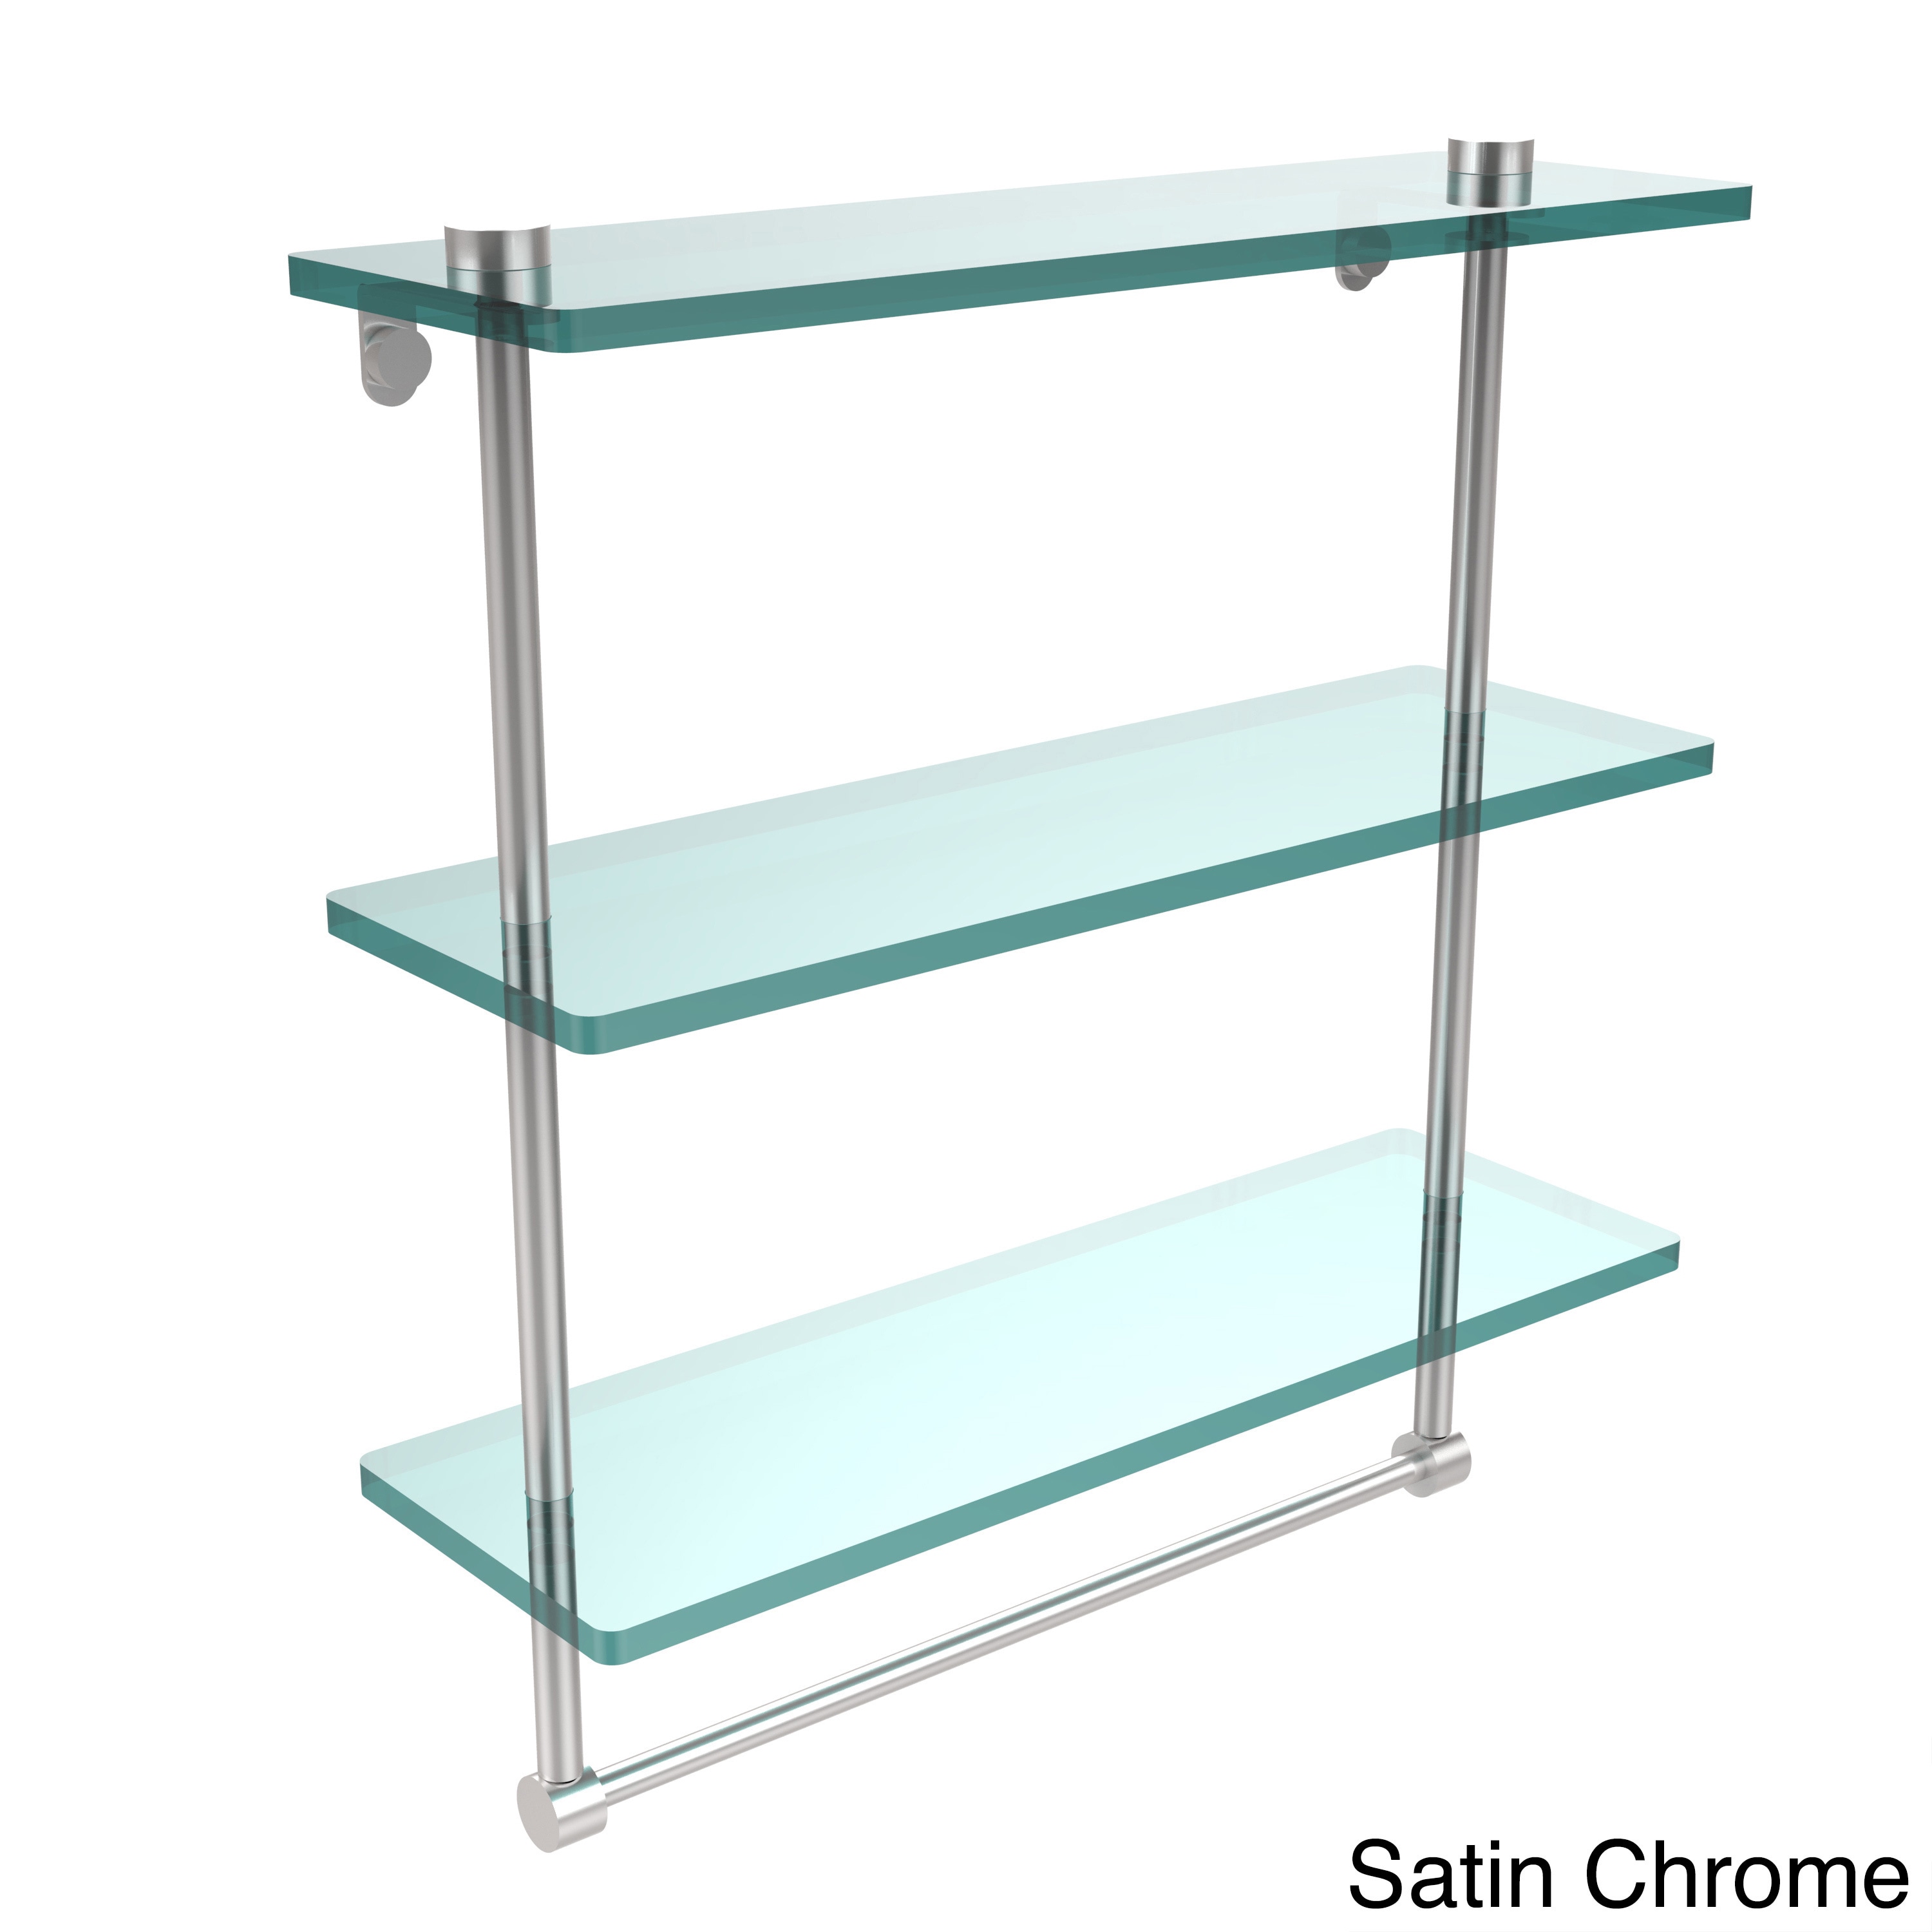 16-in Triple Tiered Glass Shelf with Integrated Towel Bar in Polished Nickel - image 4 of 5